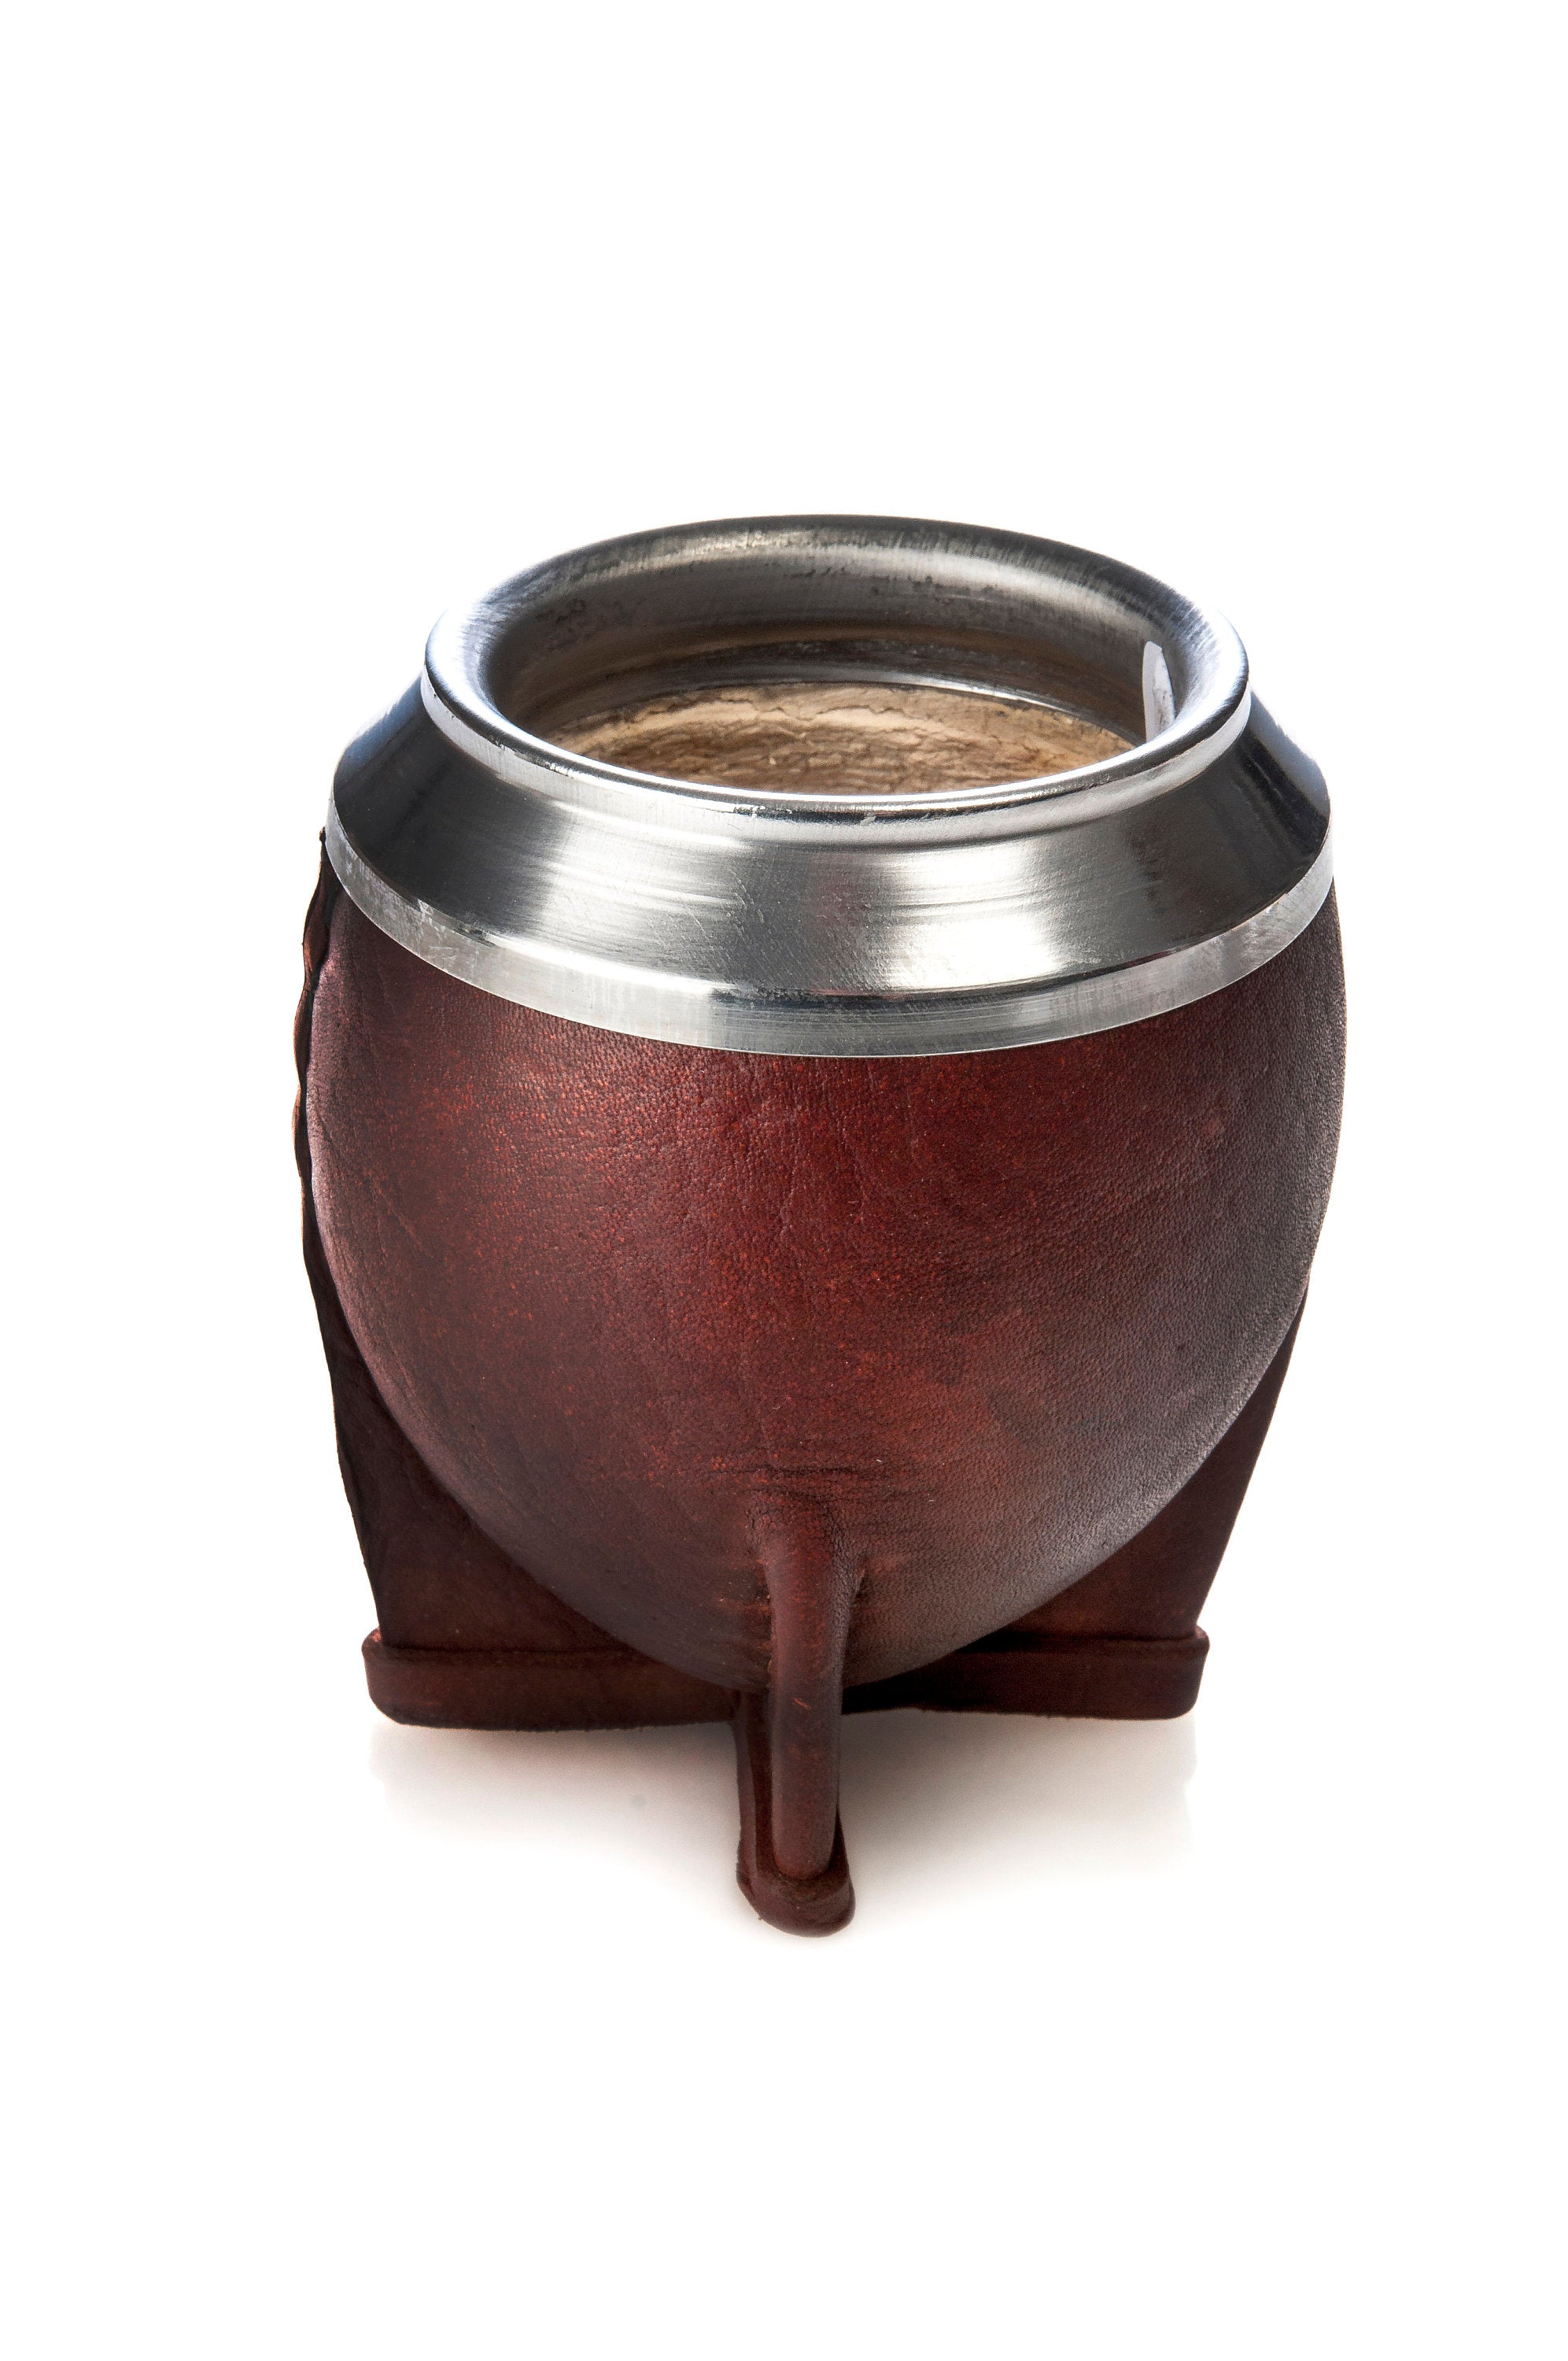 Mate Gourd , Leather , Mate Cup , Yerba Mate, Argentina Mate , Torpedo,  Calebasse Mat , Yerba Mate Gourd Leather 